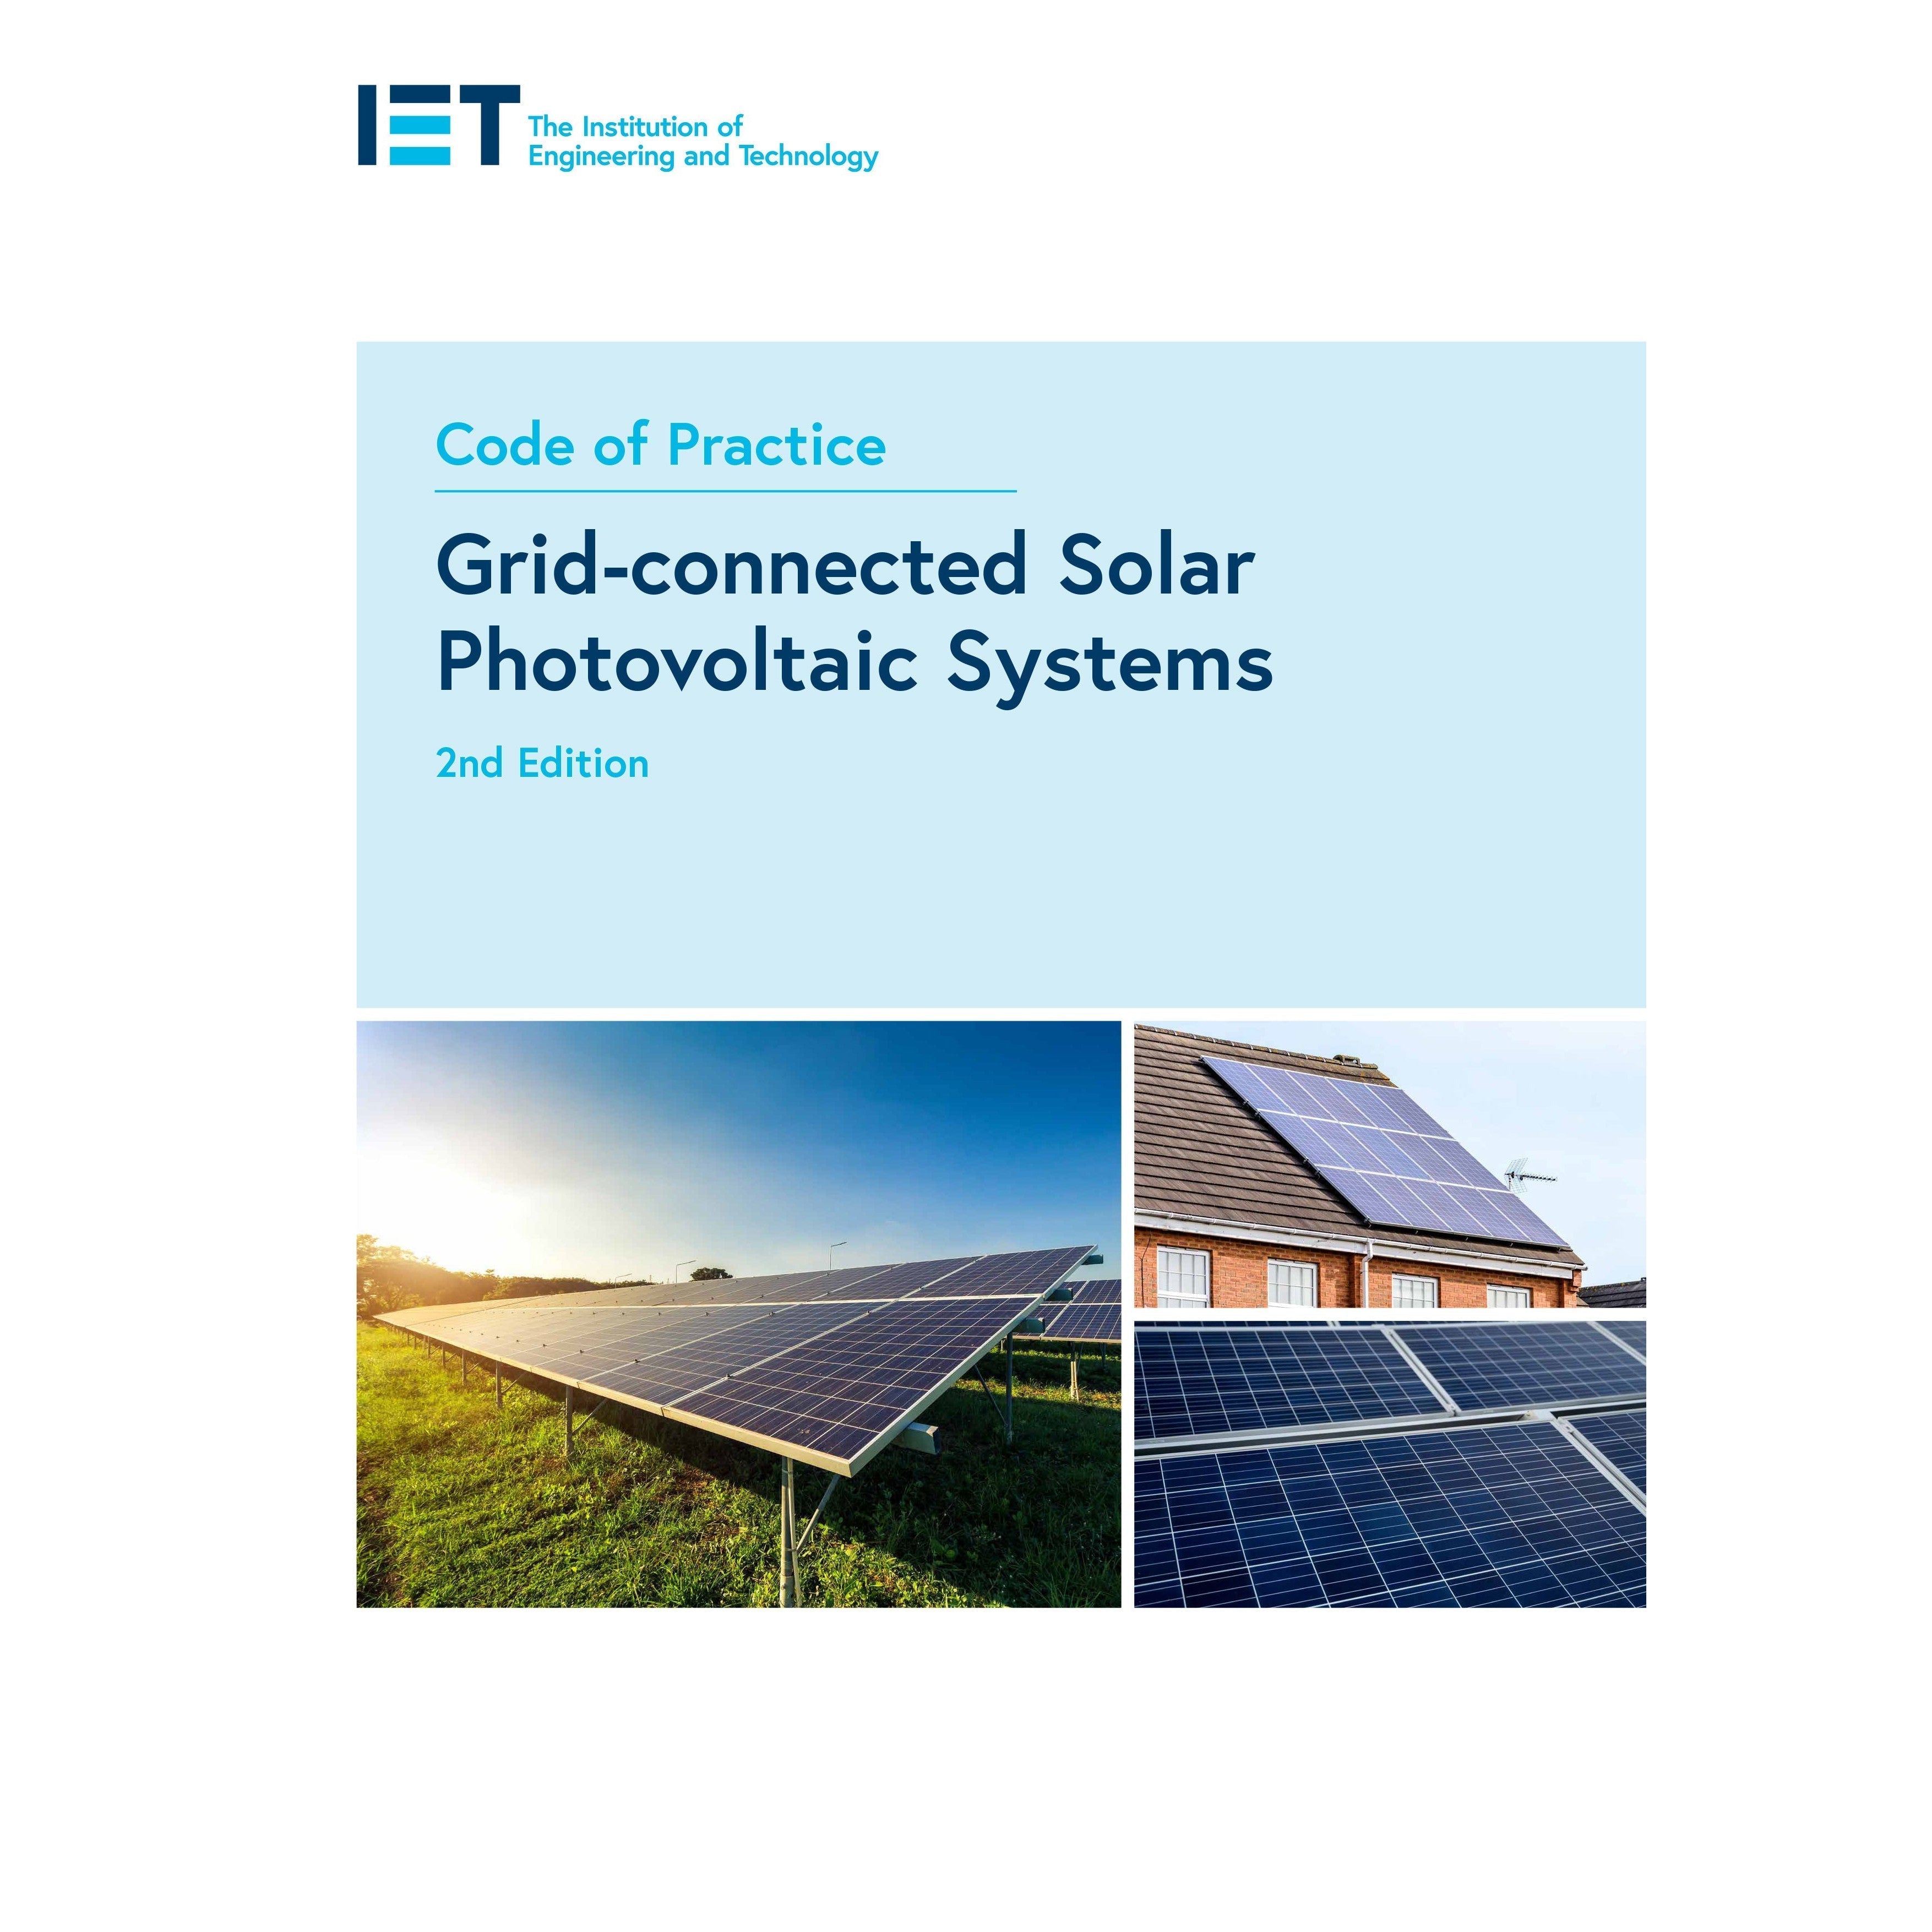 IET PIETGSPV22 Code of Practice for Grid-connected Solar Photovoltaic Systems